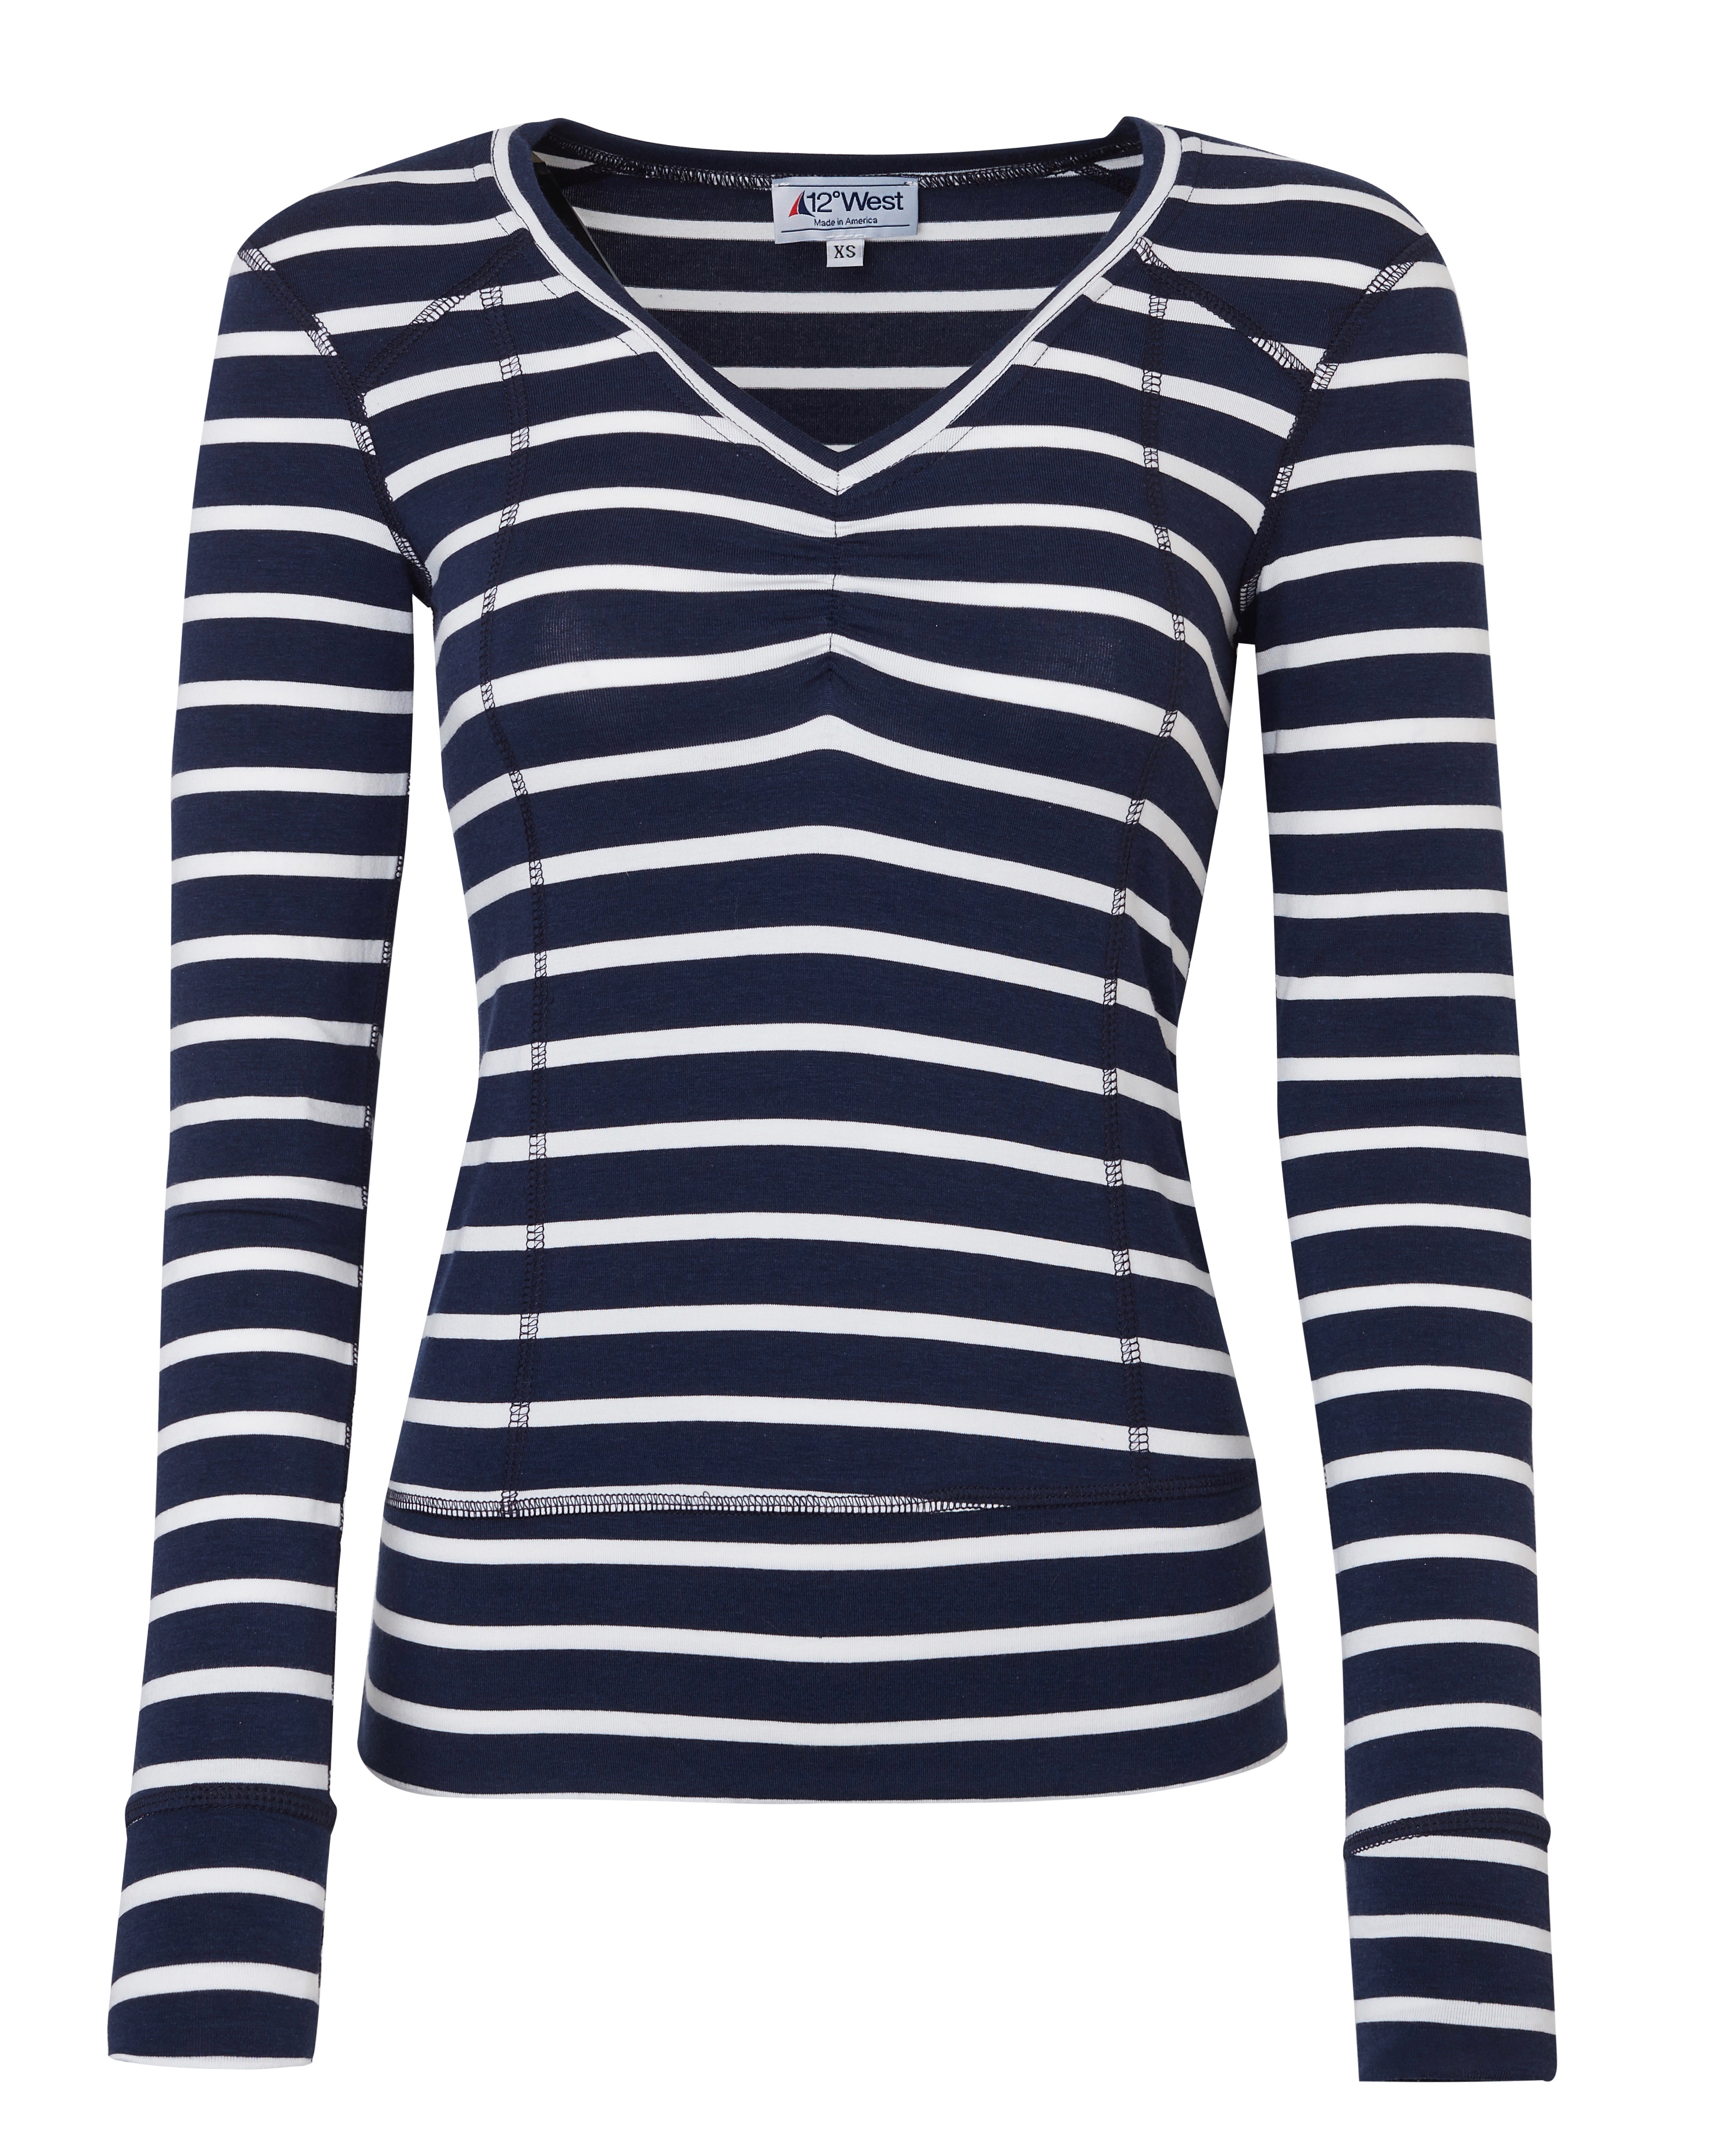 striped tees for women